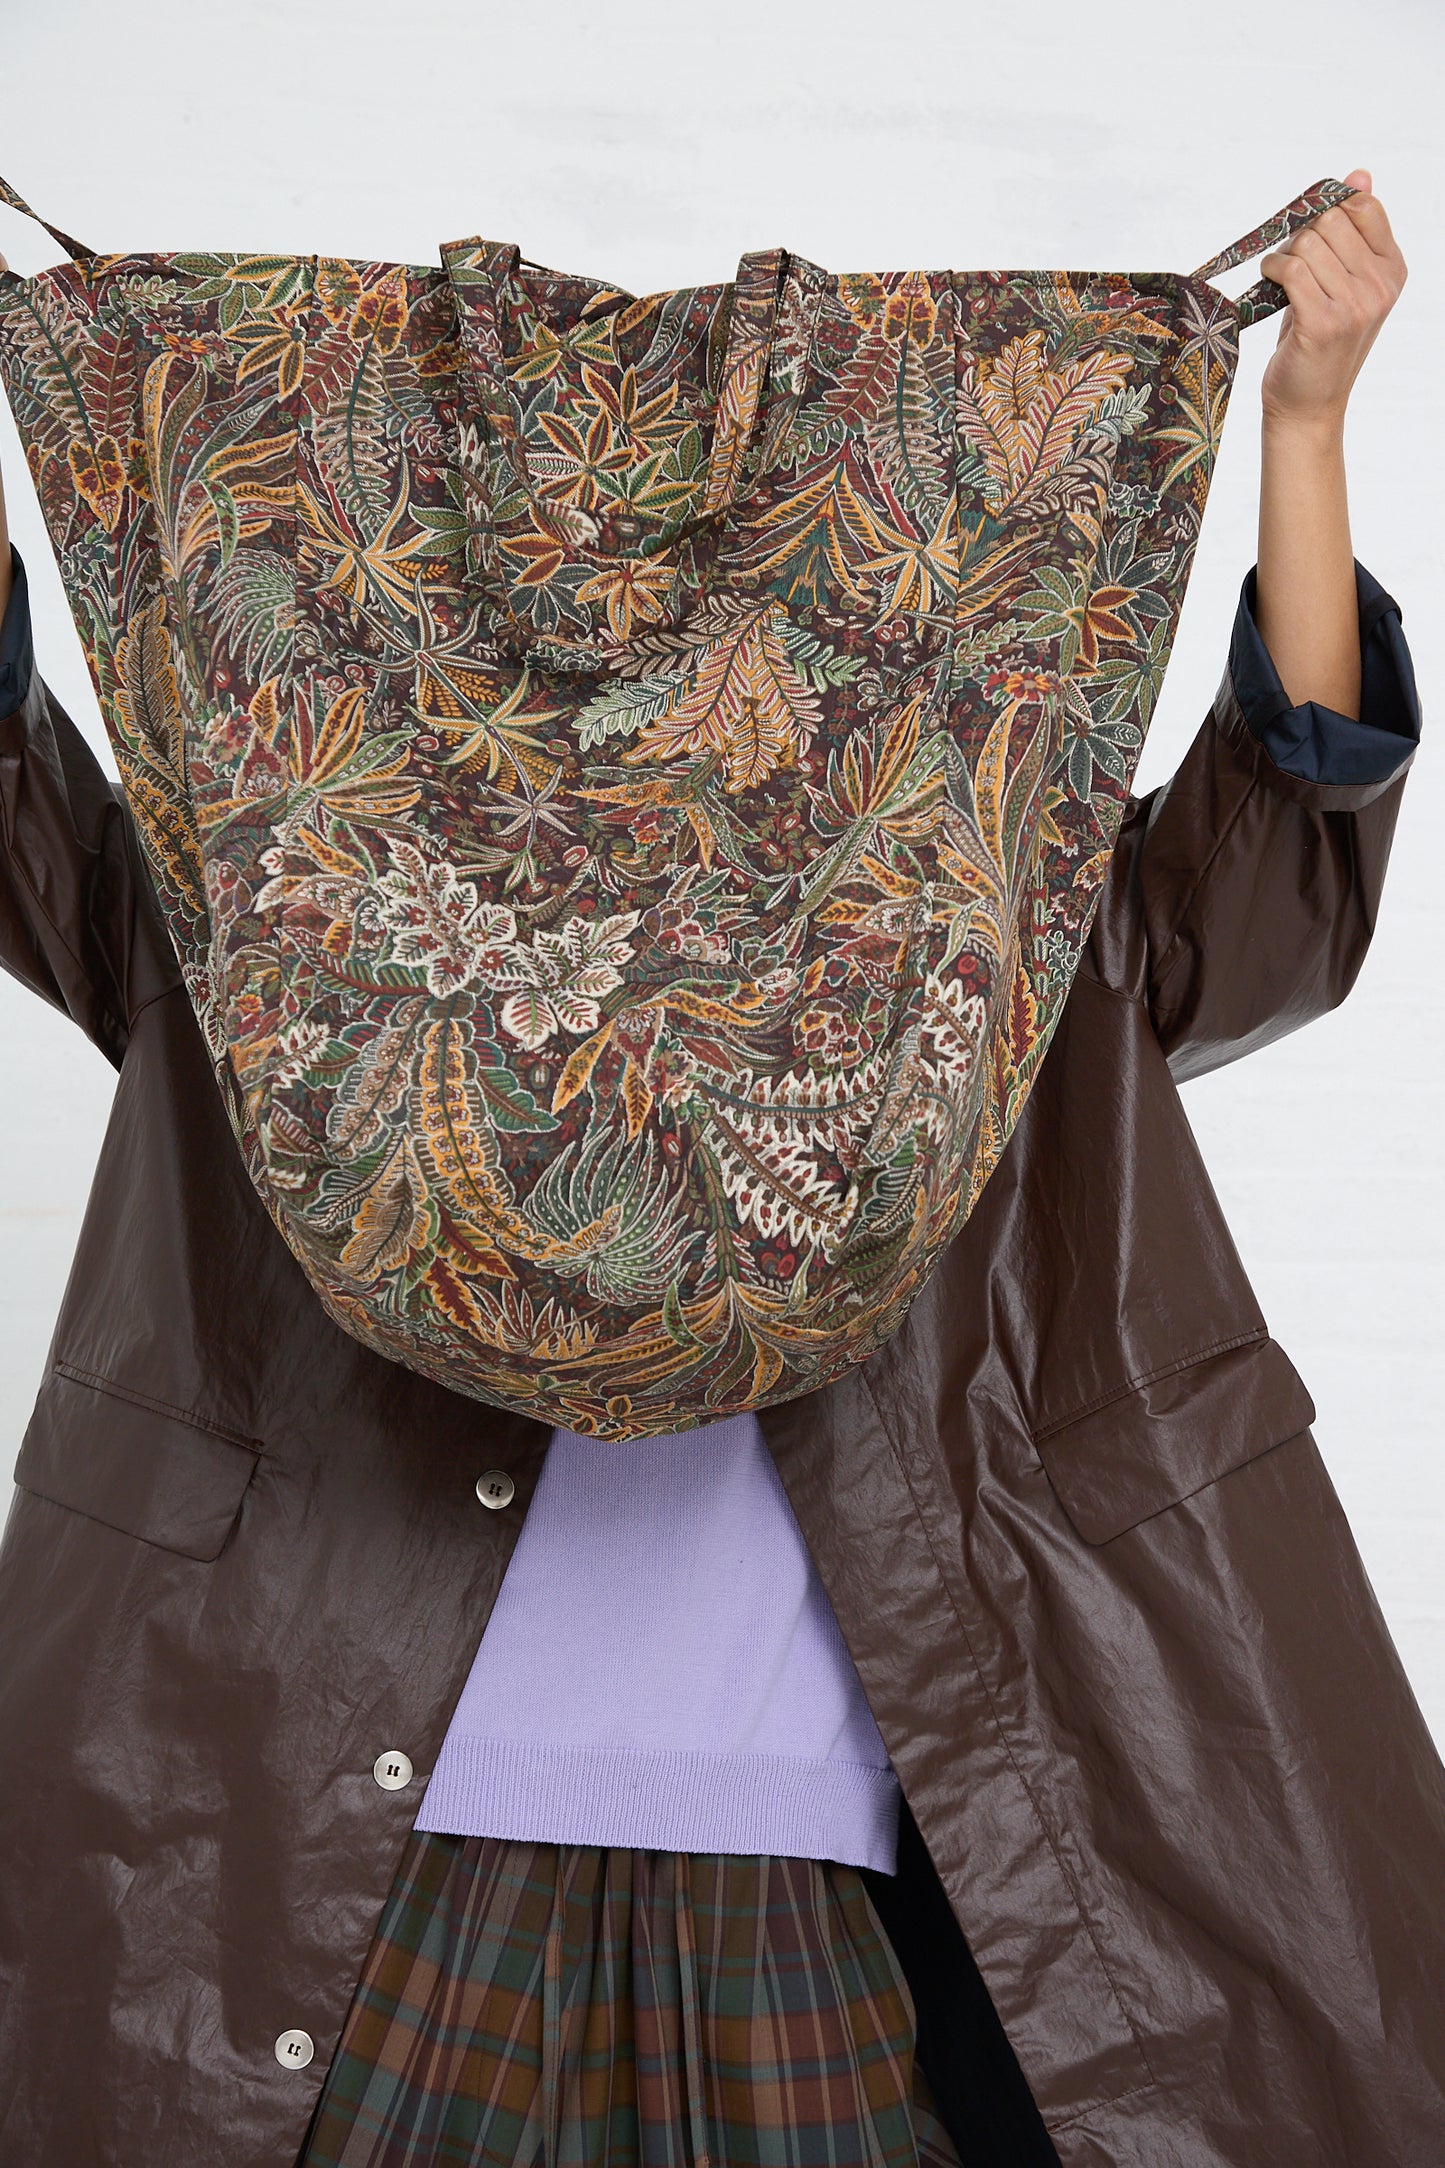 Person holding up an Amiacalva Easy Bag in Liberty Khaki print cotton decorative fabric with a leafy pattern in front of their face.